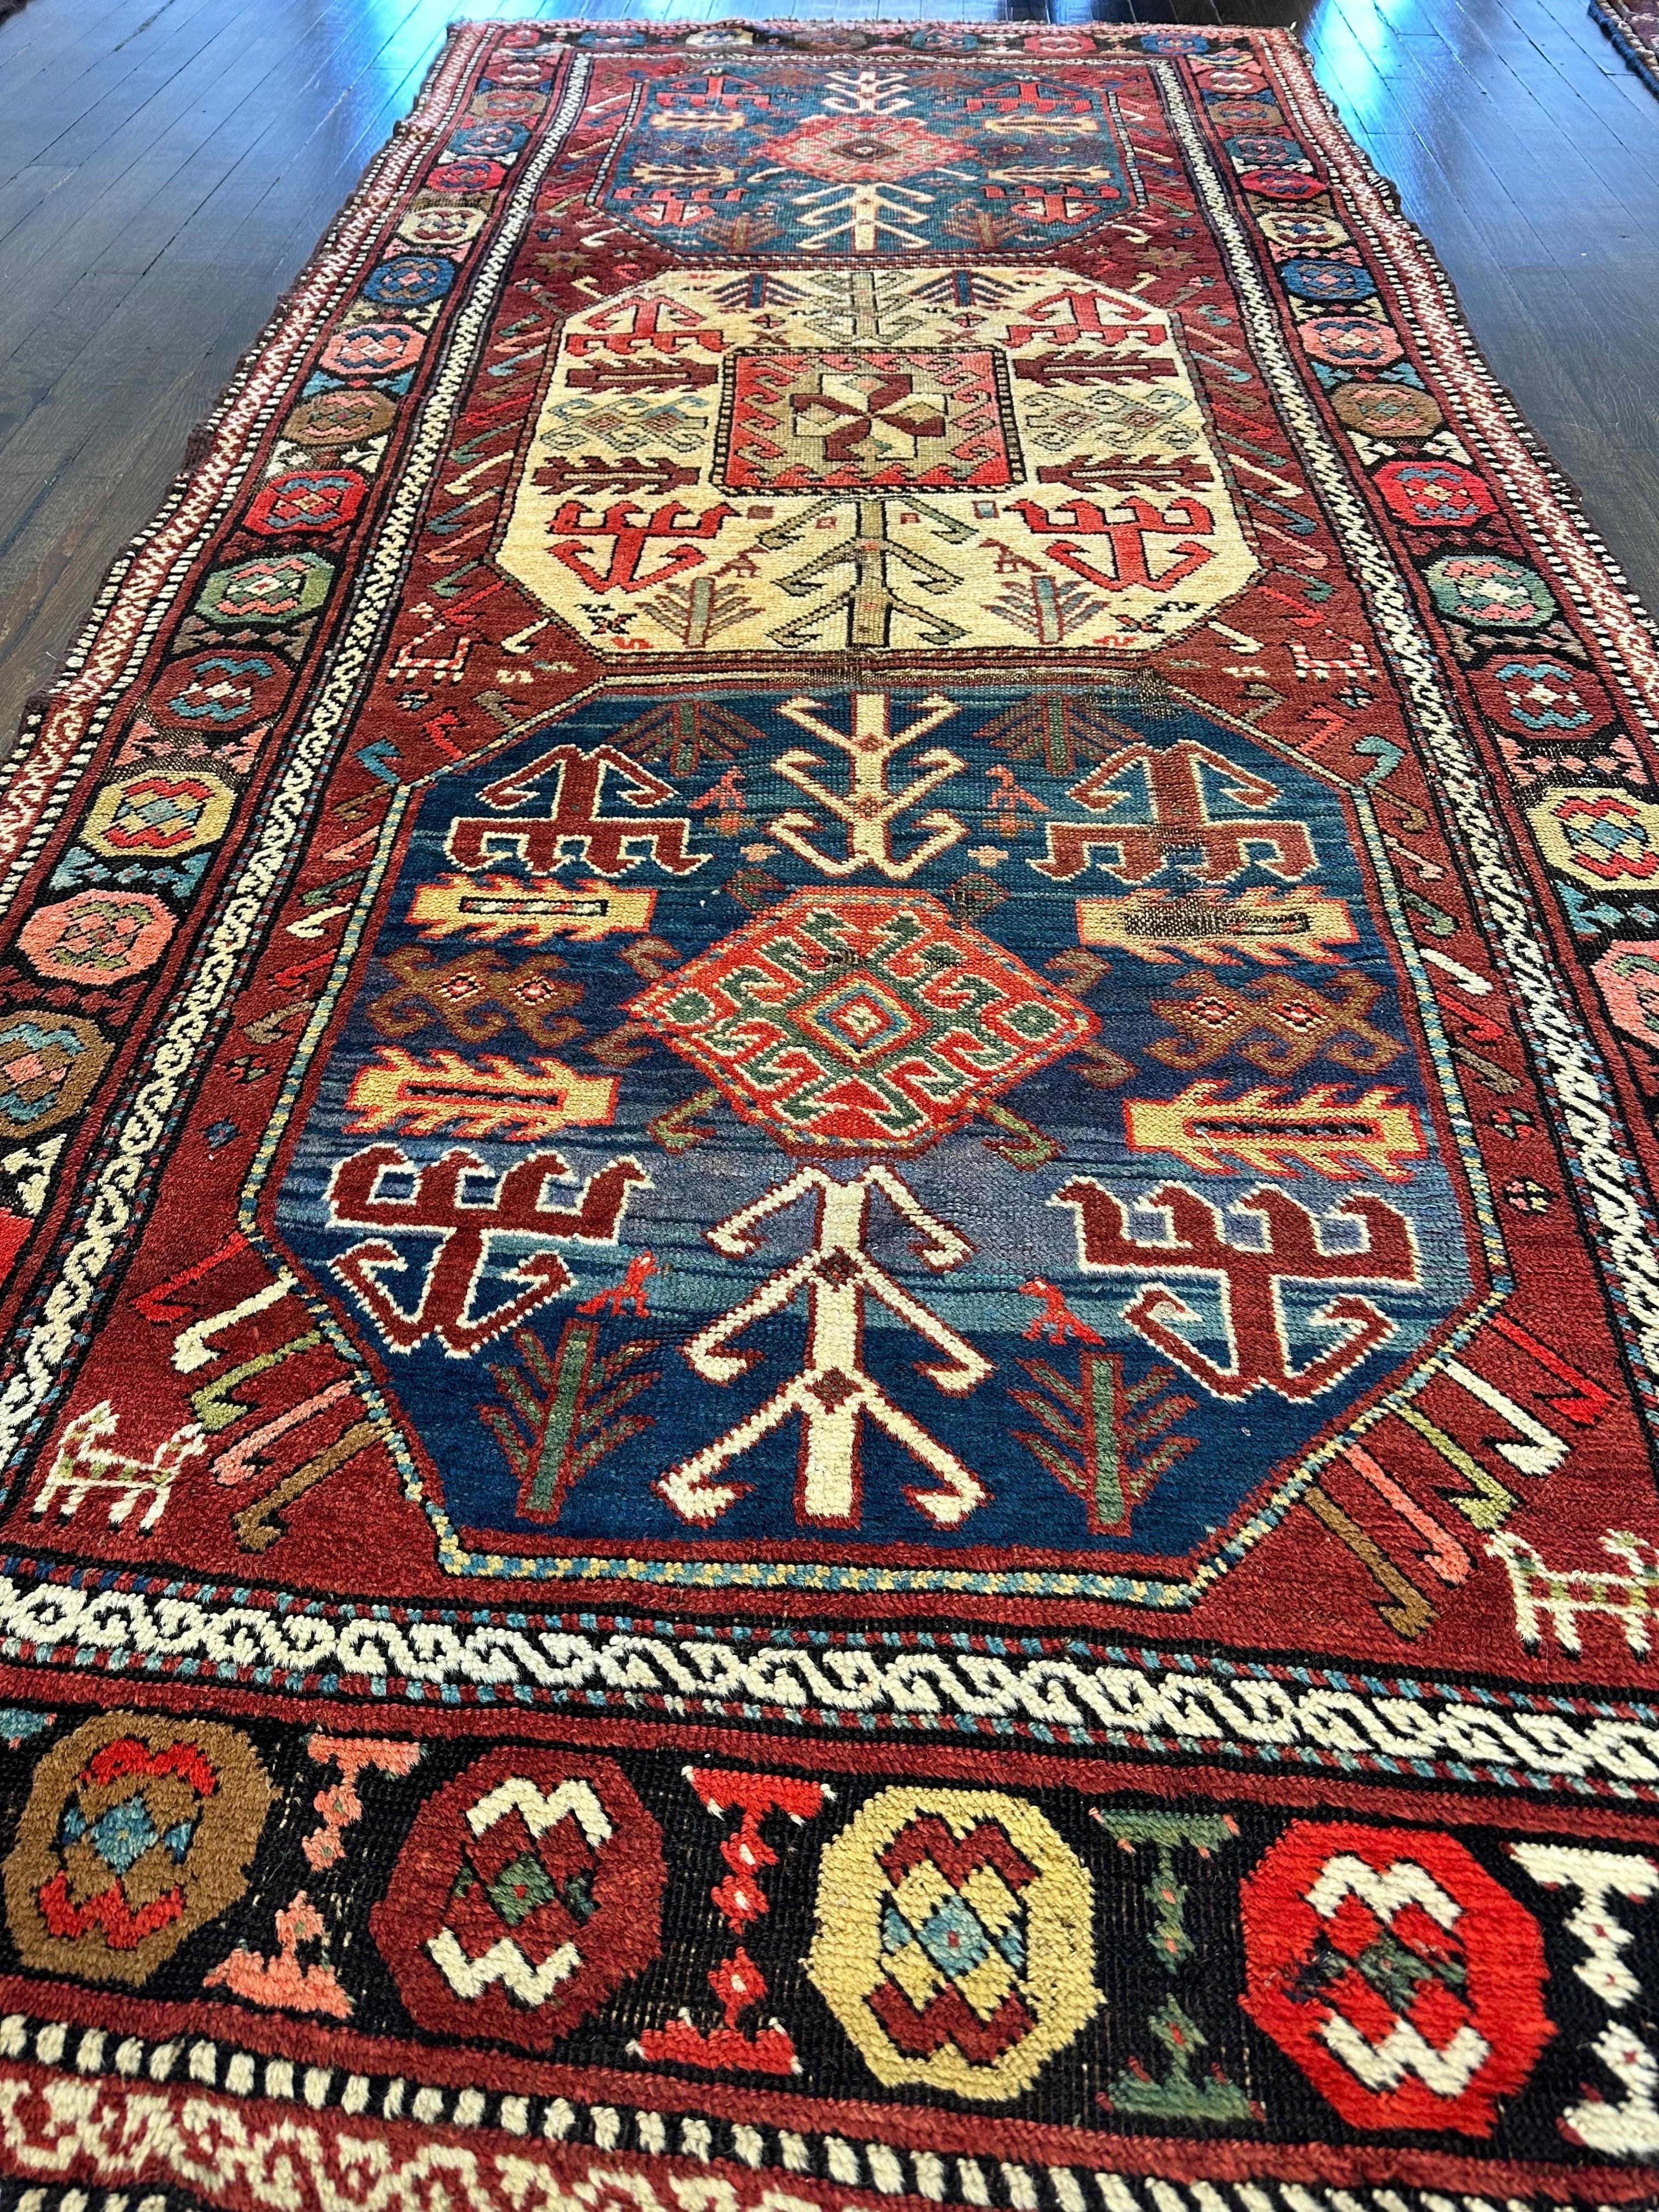 Attractive and very colorful  Caucasian rug created in the Karachov region  featuring three octagon shaped medallions,two in pale green and the middle one with ivory ground.Within each of these medallions there are smaller medallions and other